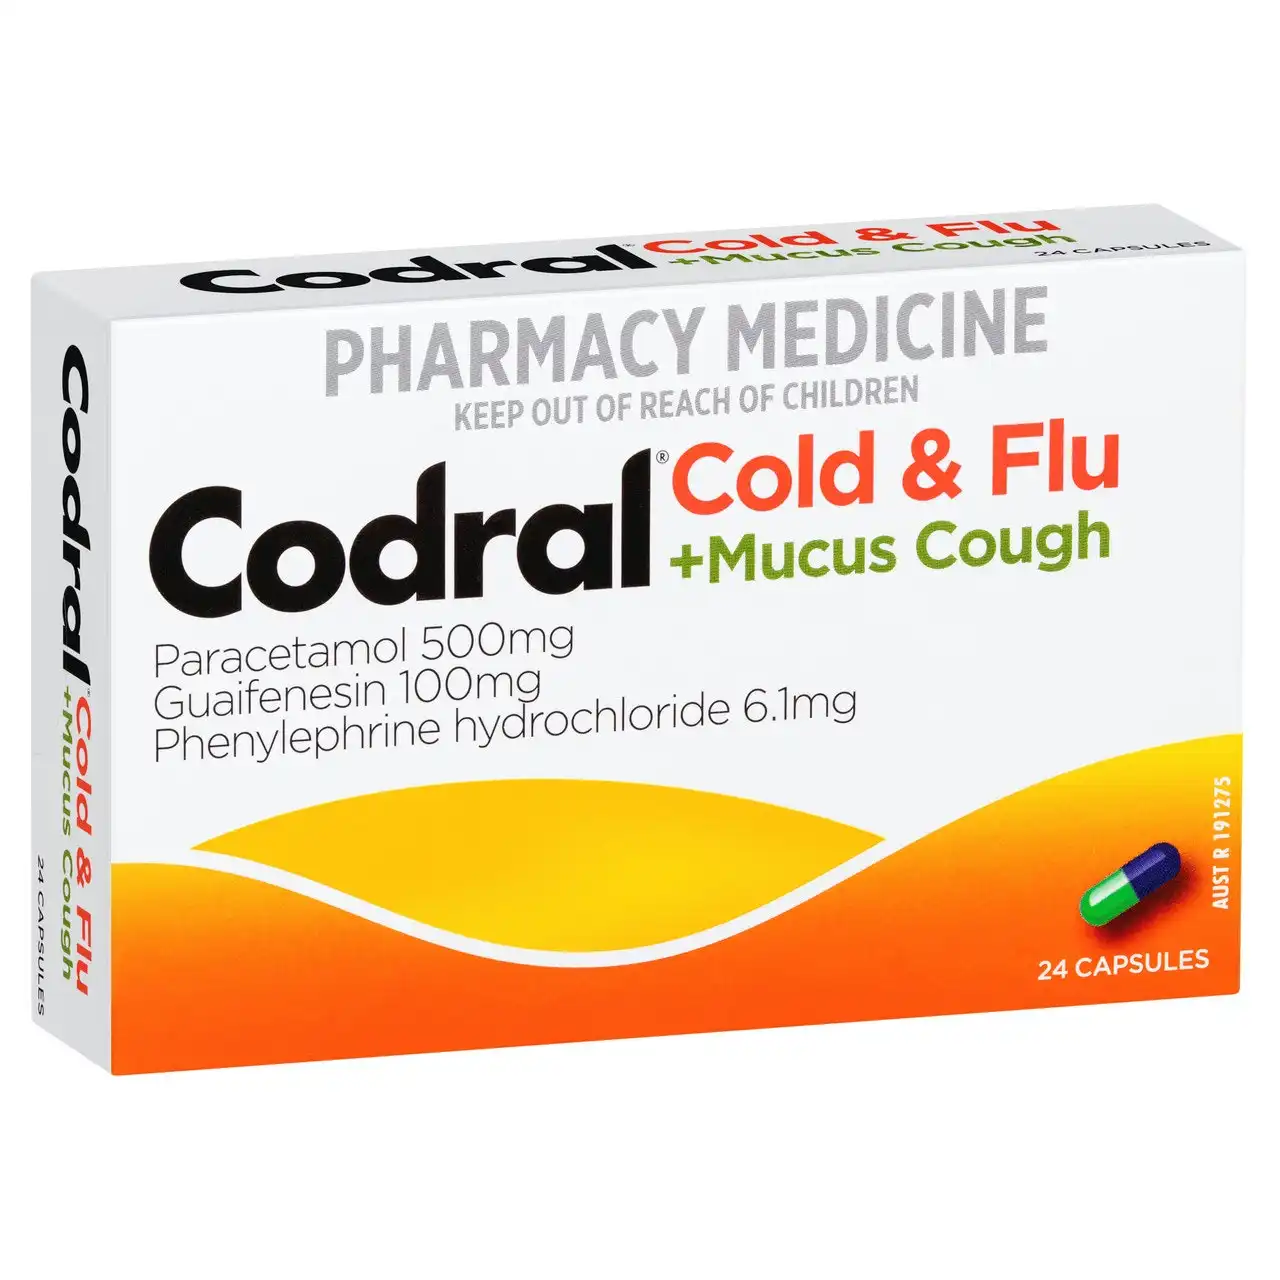 CODRAL Cold & Flu + Mucus Cough Capsules 24 Pack